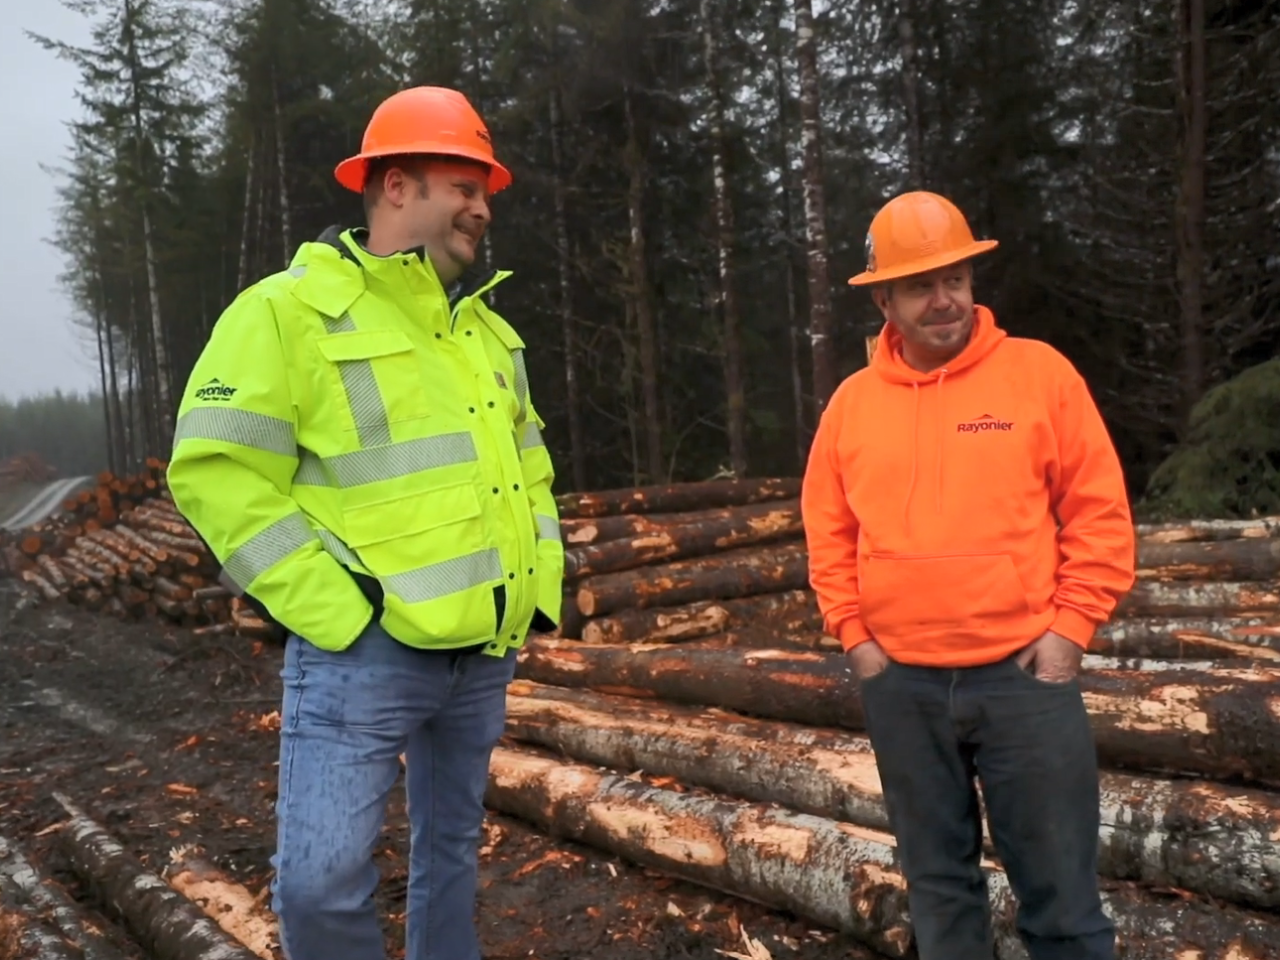 Two people in high-vis clothing and hard hats talking by piles of cut timber.